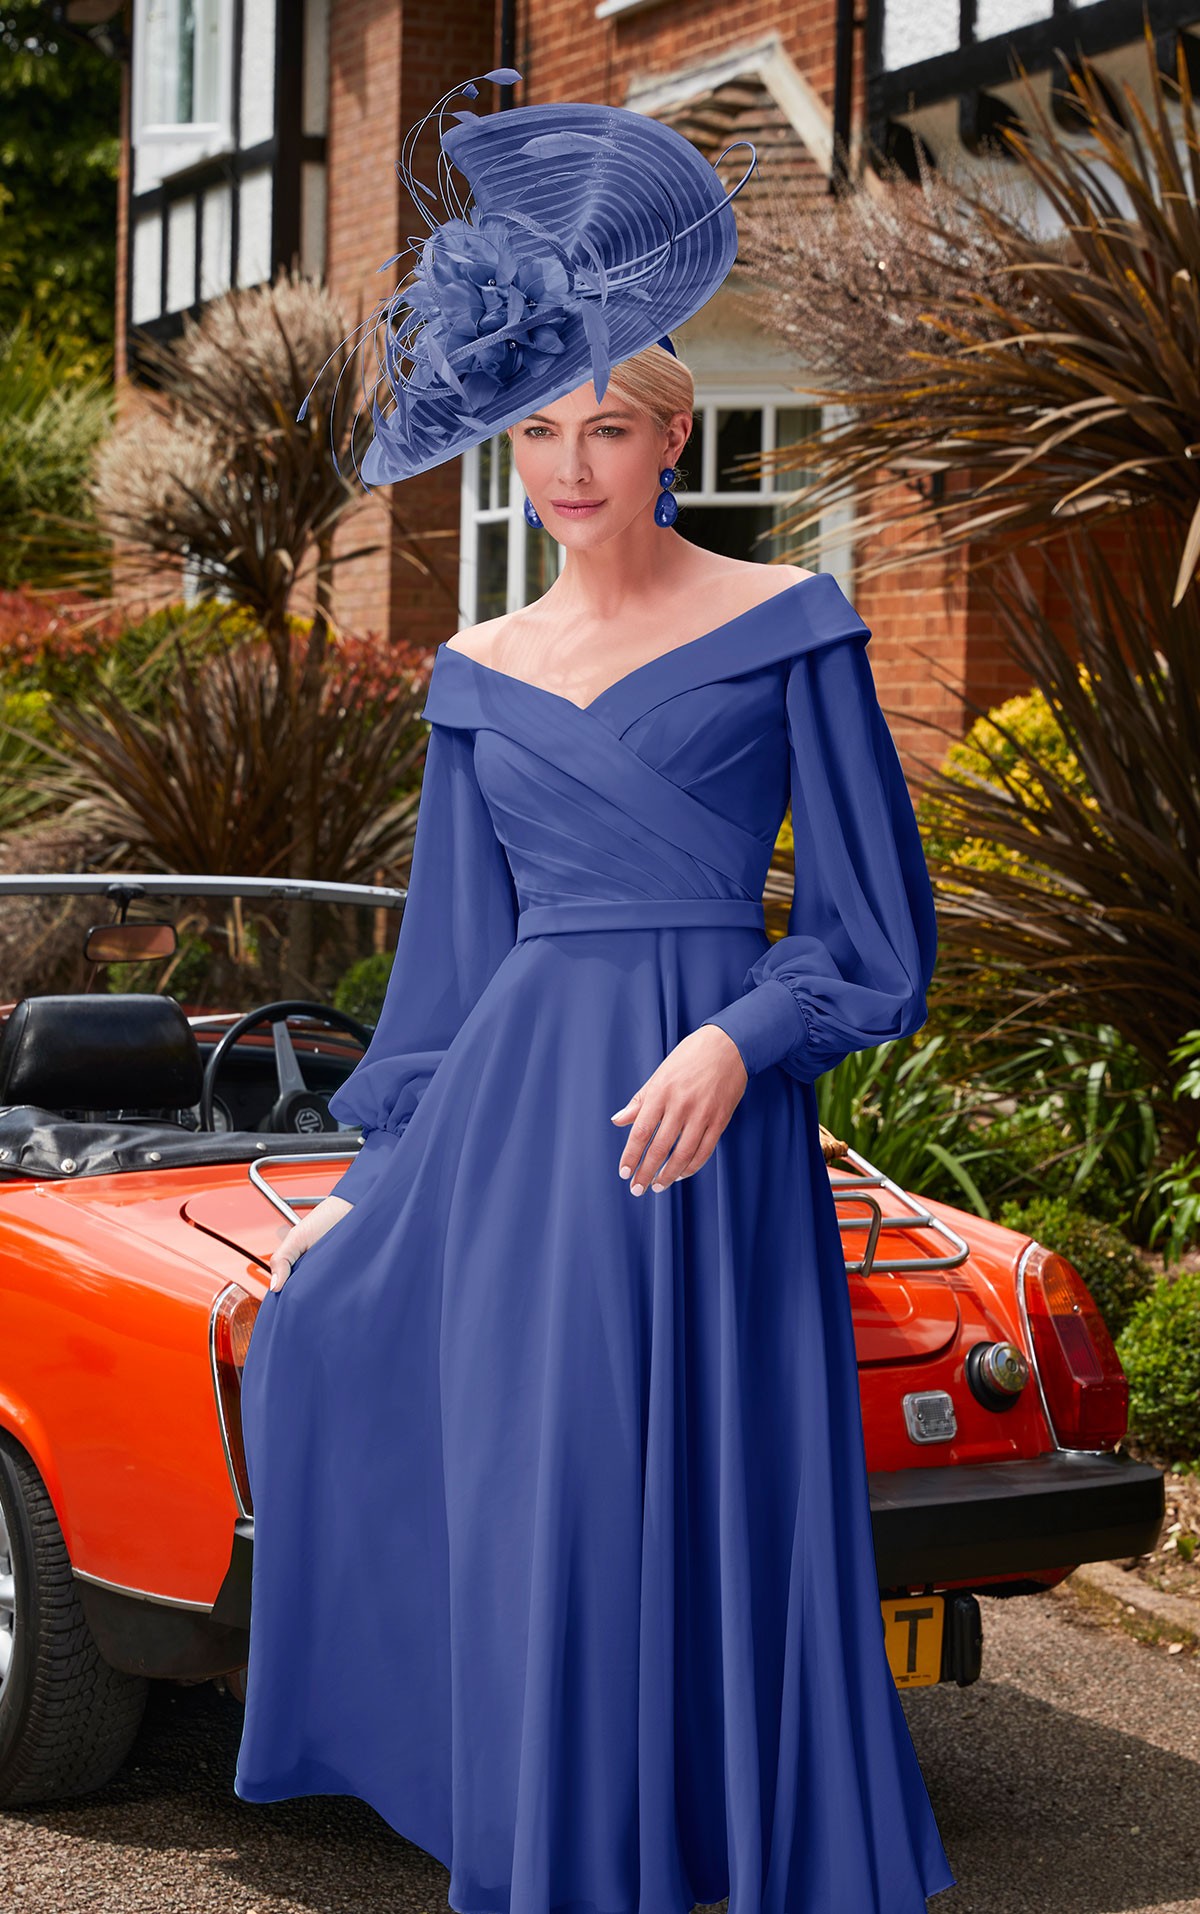 Veni Infantino 29677 - size 22 - Veni Infantino 29677 - Royal Blue Chiffon dress with Off the shoulder neck & sleeves Mother of the Bride /groom dresses on Sale at Occasions at Blessings Loyal Parade, Mill Rise, Westdene, Brighton. BN1 5GG T: 01273 505766 E: info@blessingsbridal.co.uk